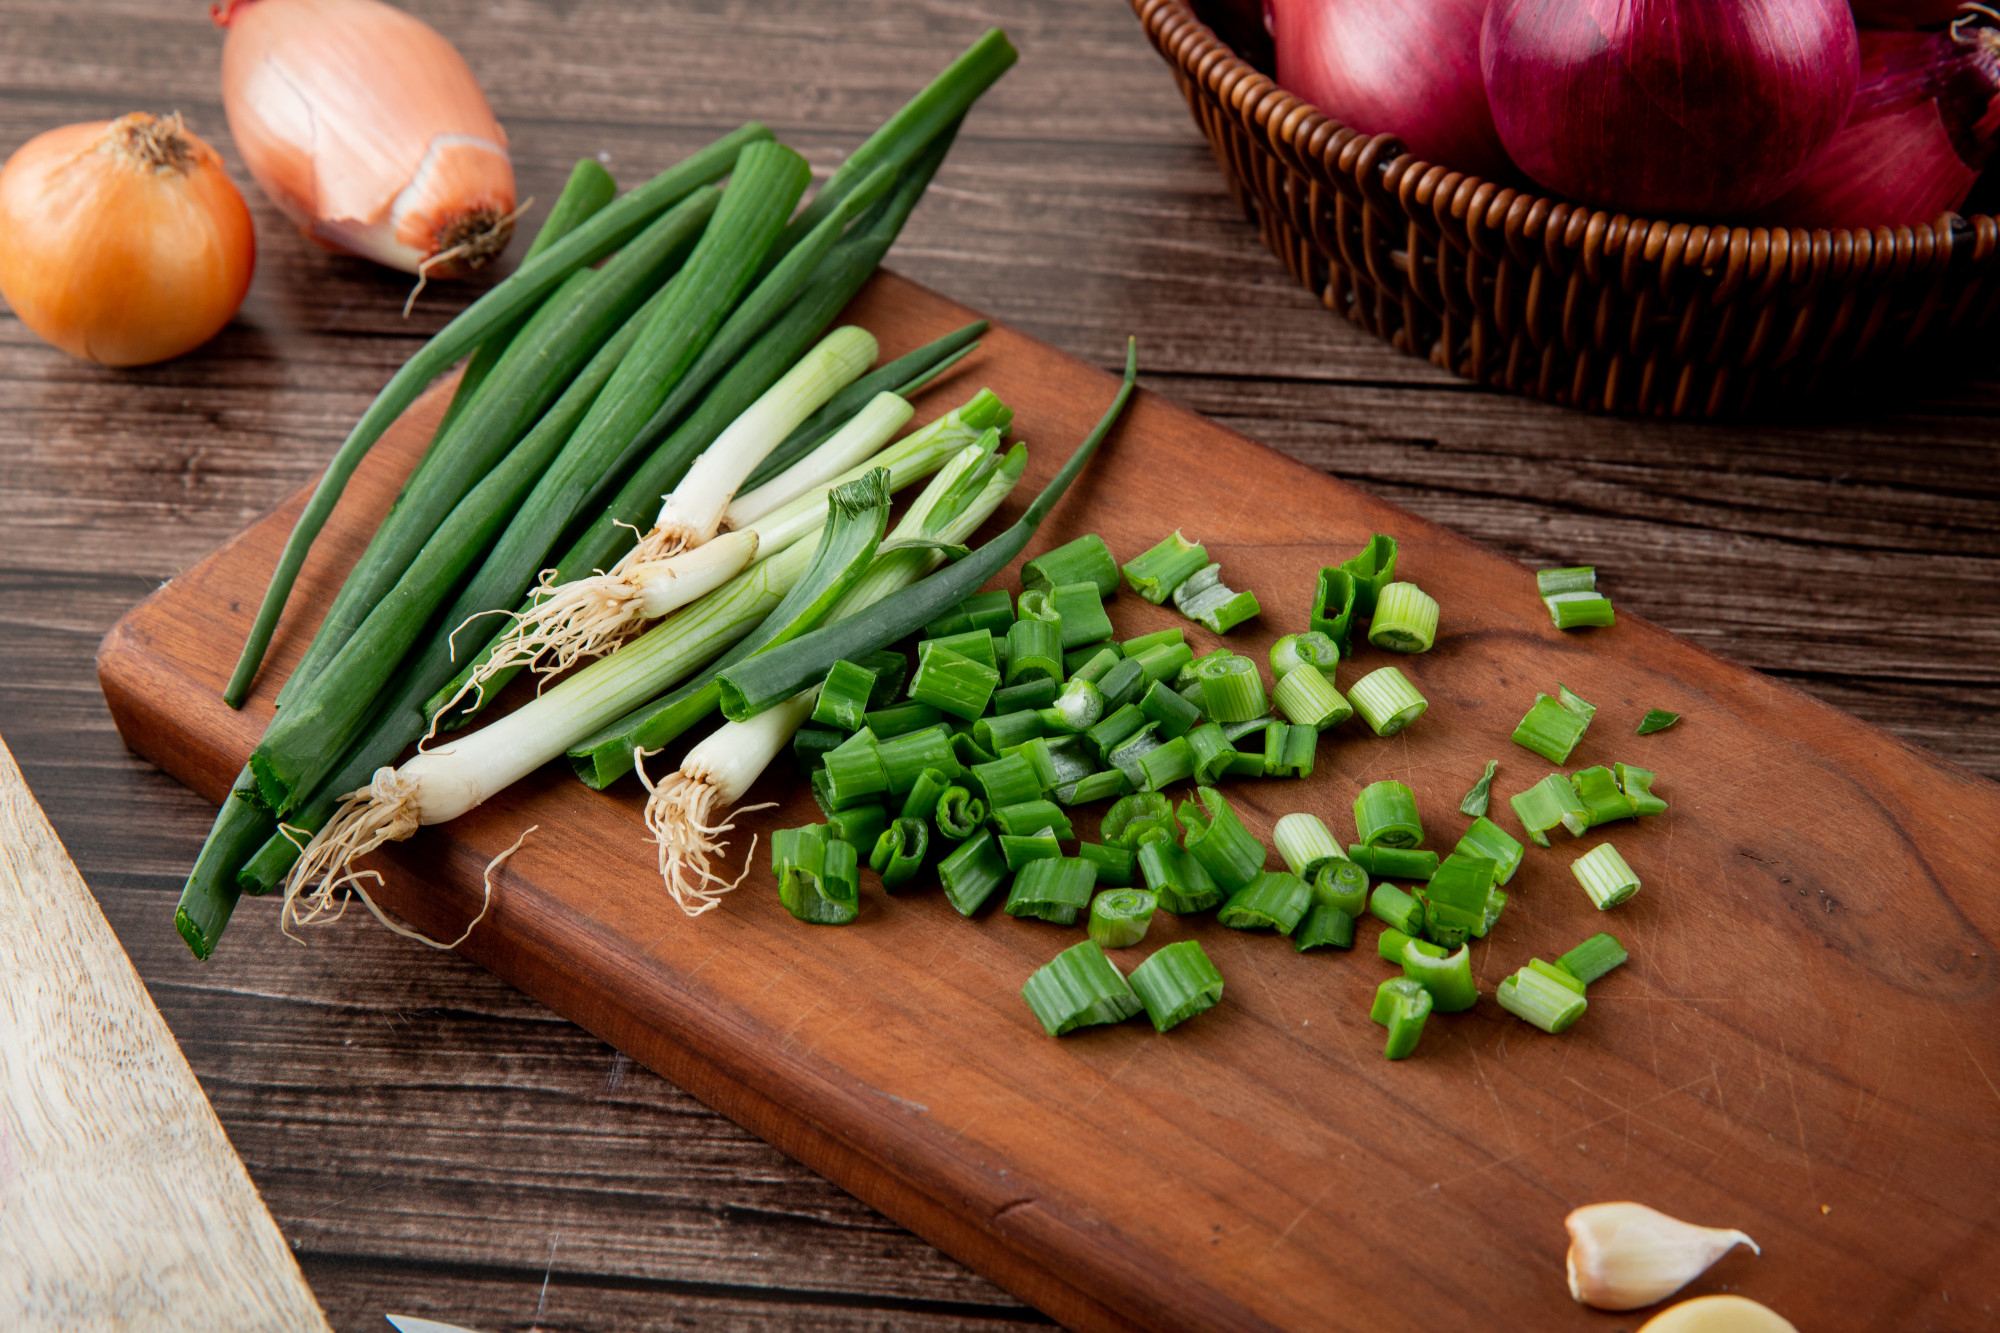 close up view cut green onion wooden surface wooden background